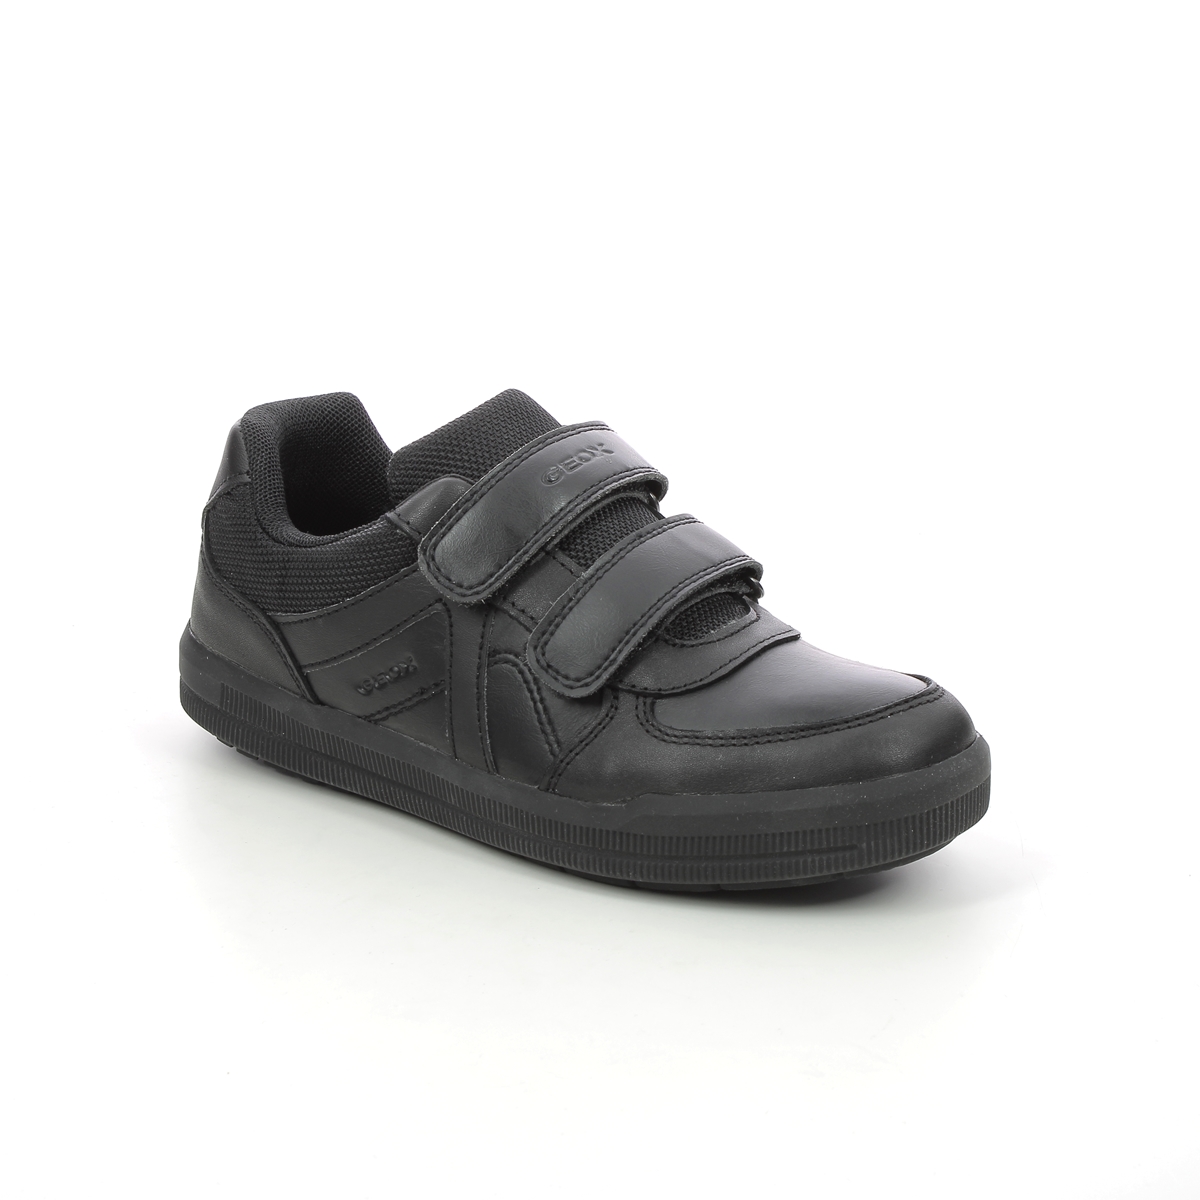 Geox - Arzach Boy Vel (Black Leather) J844Ae-C9999 In Size 27 In Plain Black Leather For School For kids